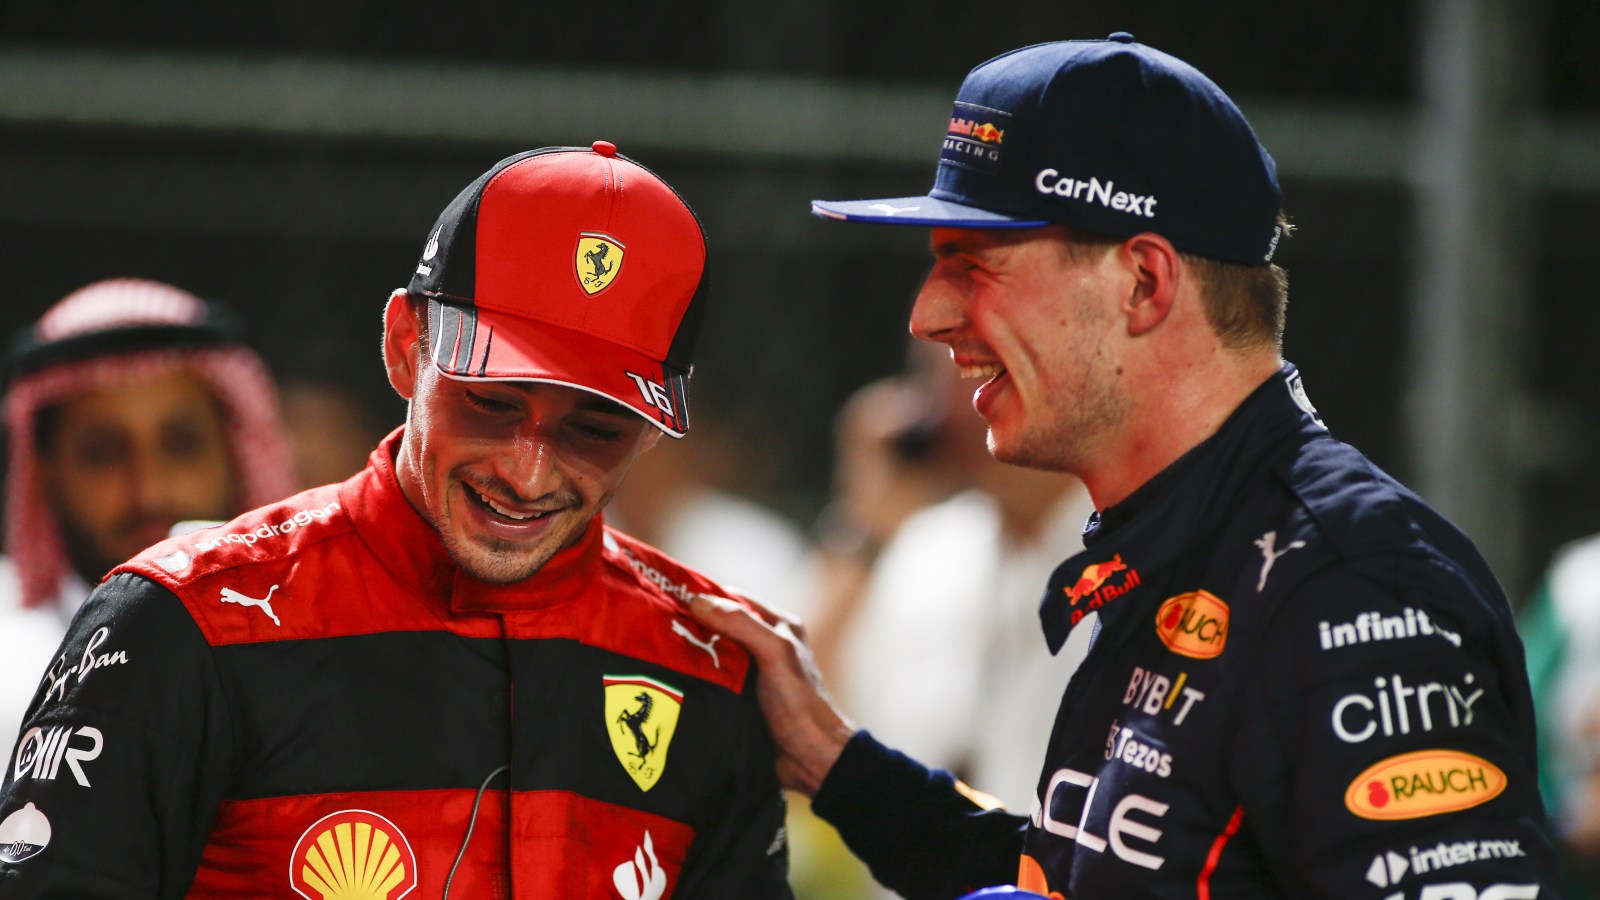 Charles Leclerc laughs with Max Verstappen after the Saudi Arabian Grand Prix. Saudi Arabia, March 2022.